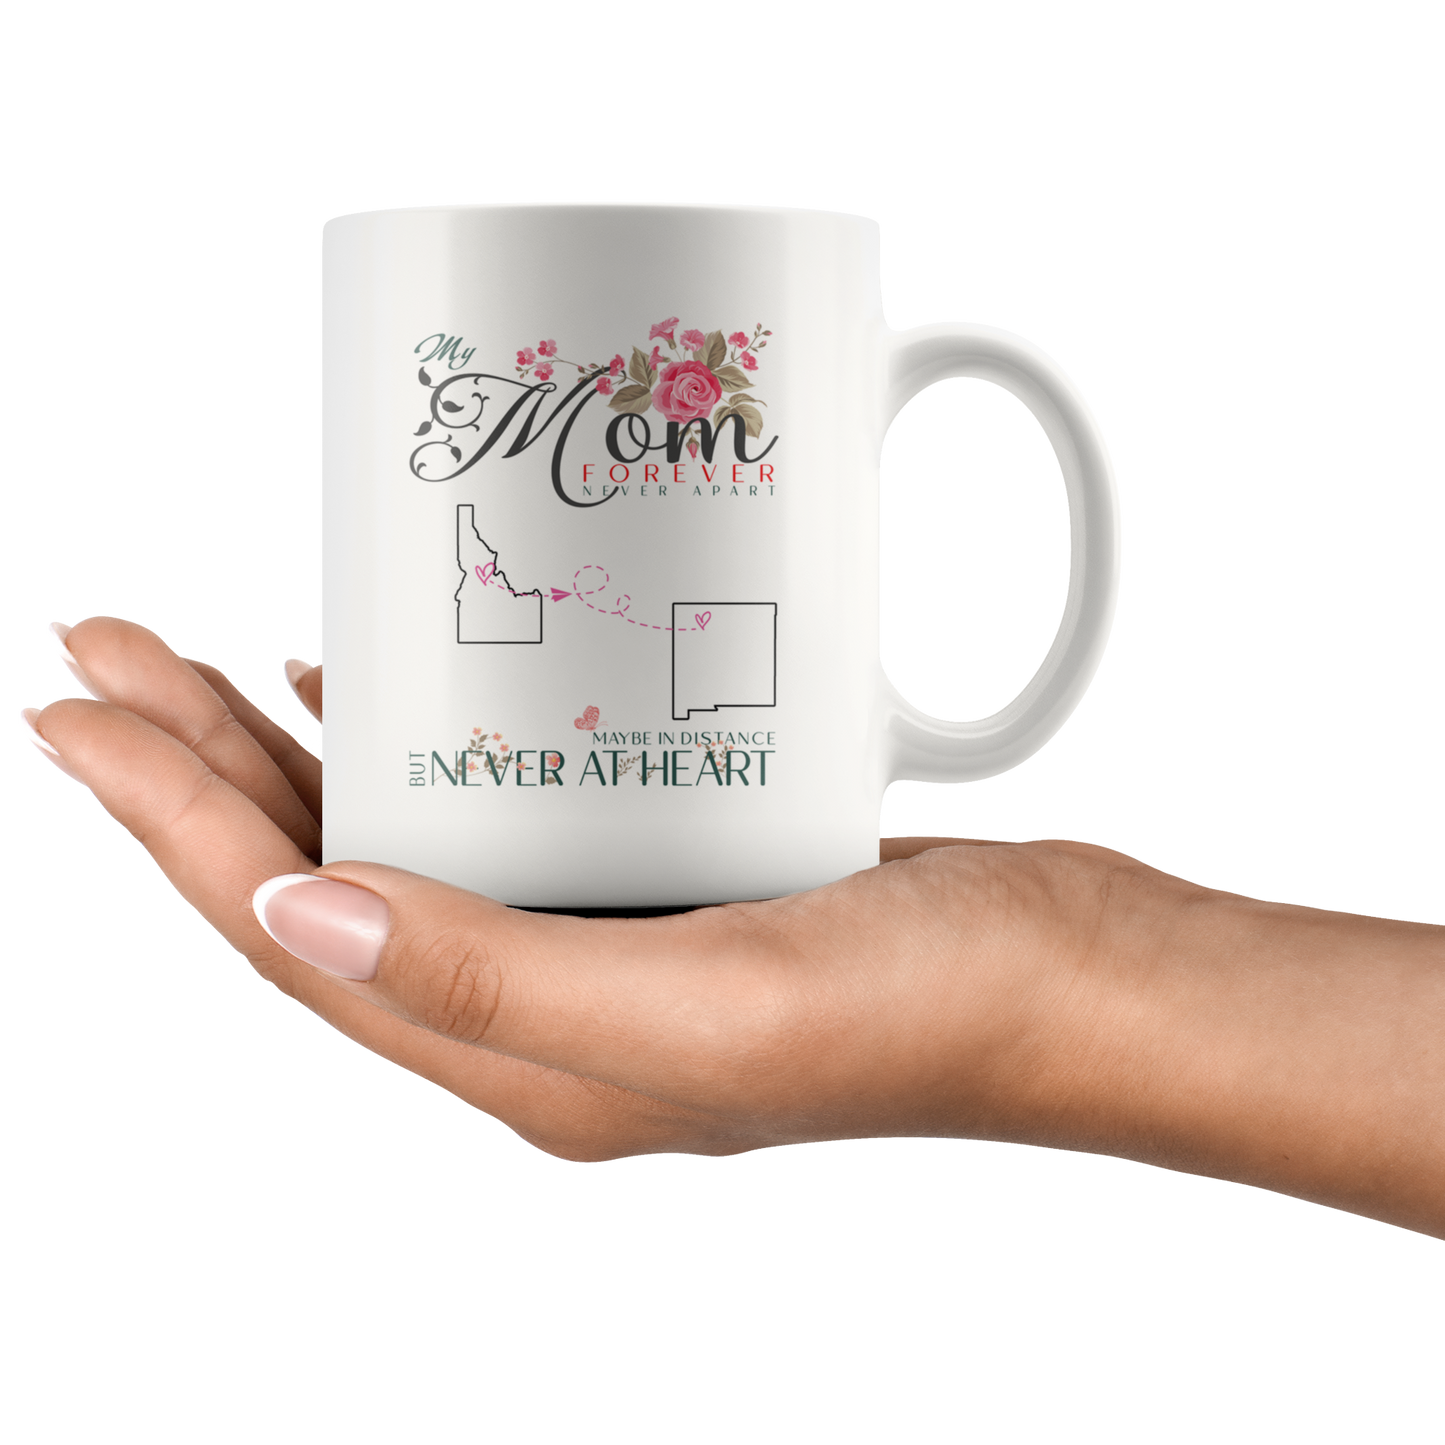 M-20321571-sp-23932 - [ Idaho | New Mexico ]Personalized Mothers Day Coffee Mug - My Mom Forever Never A